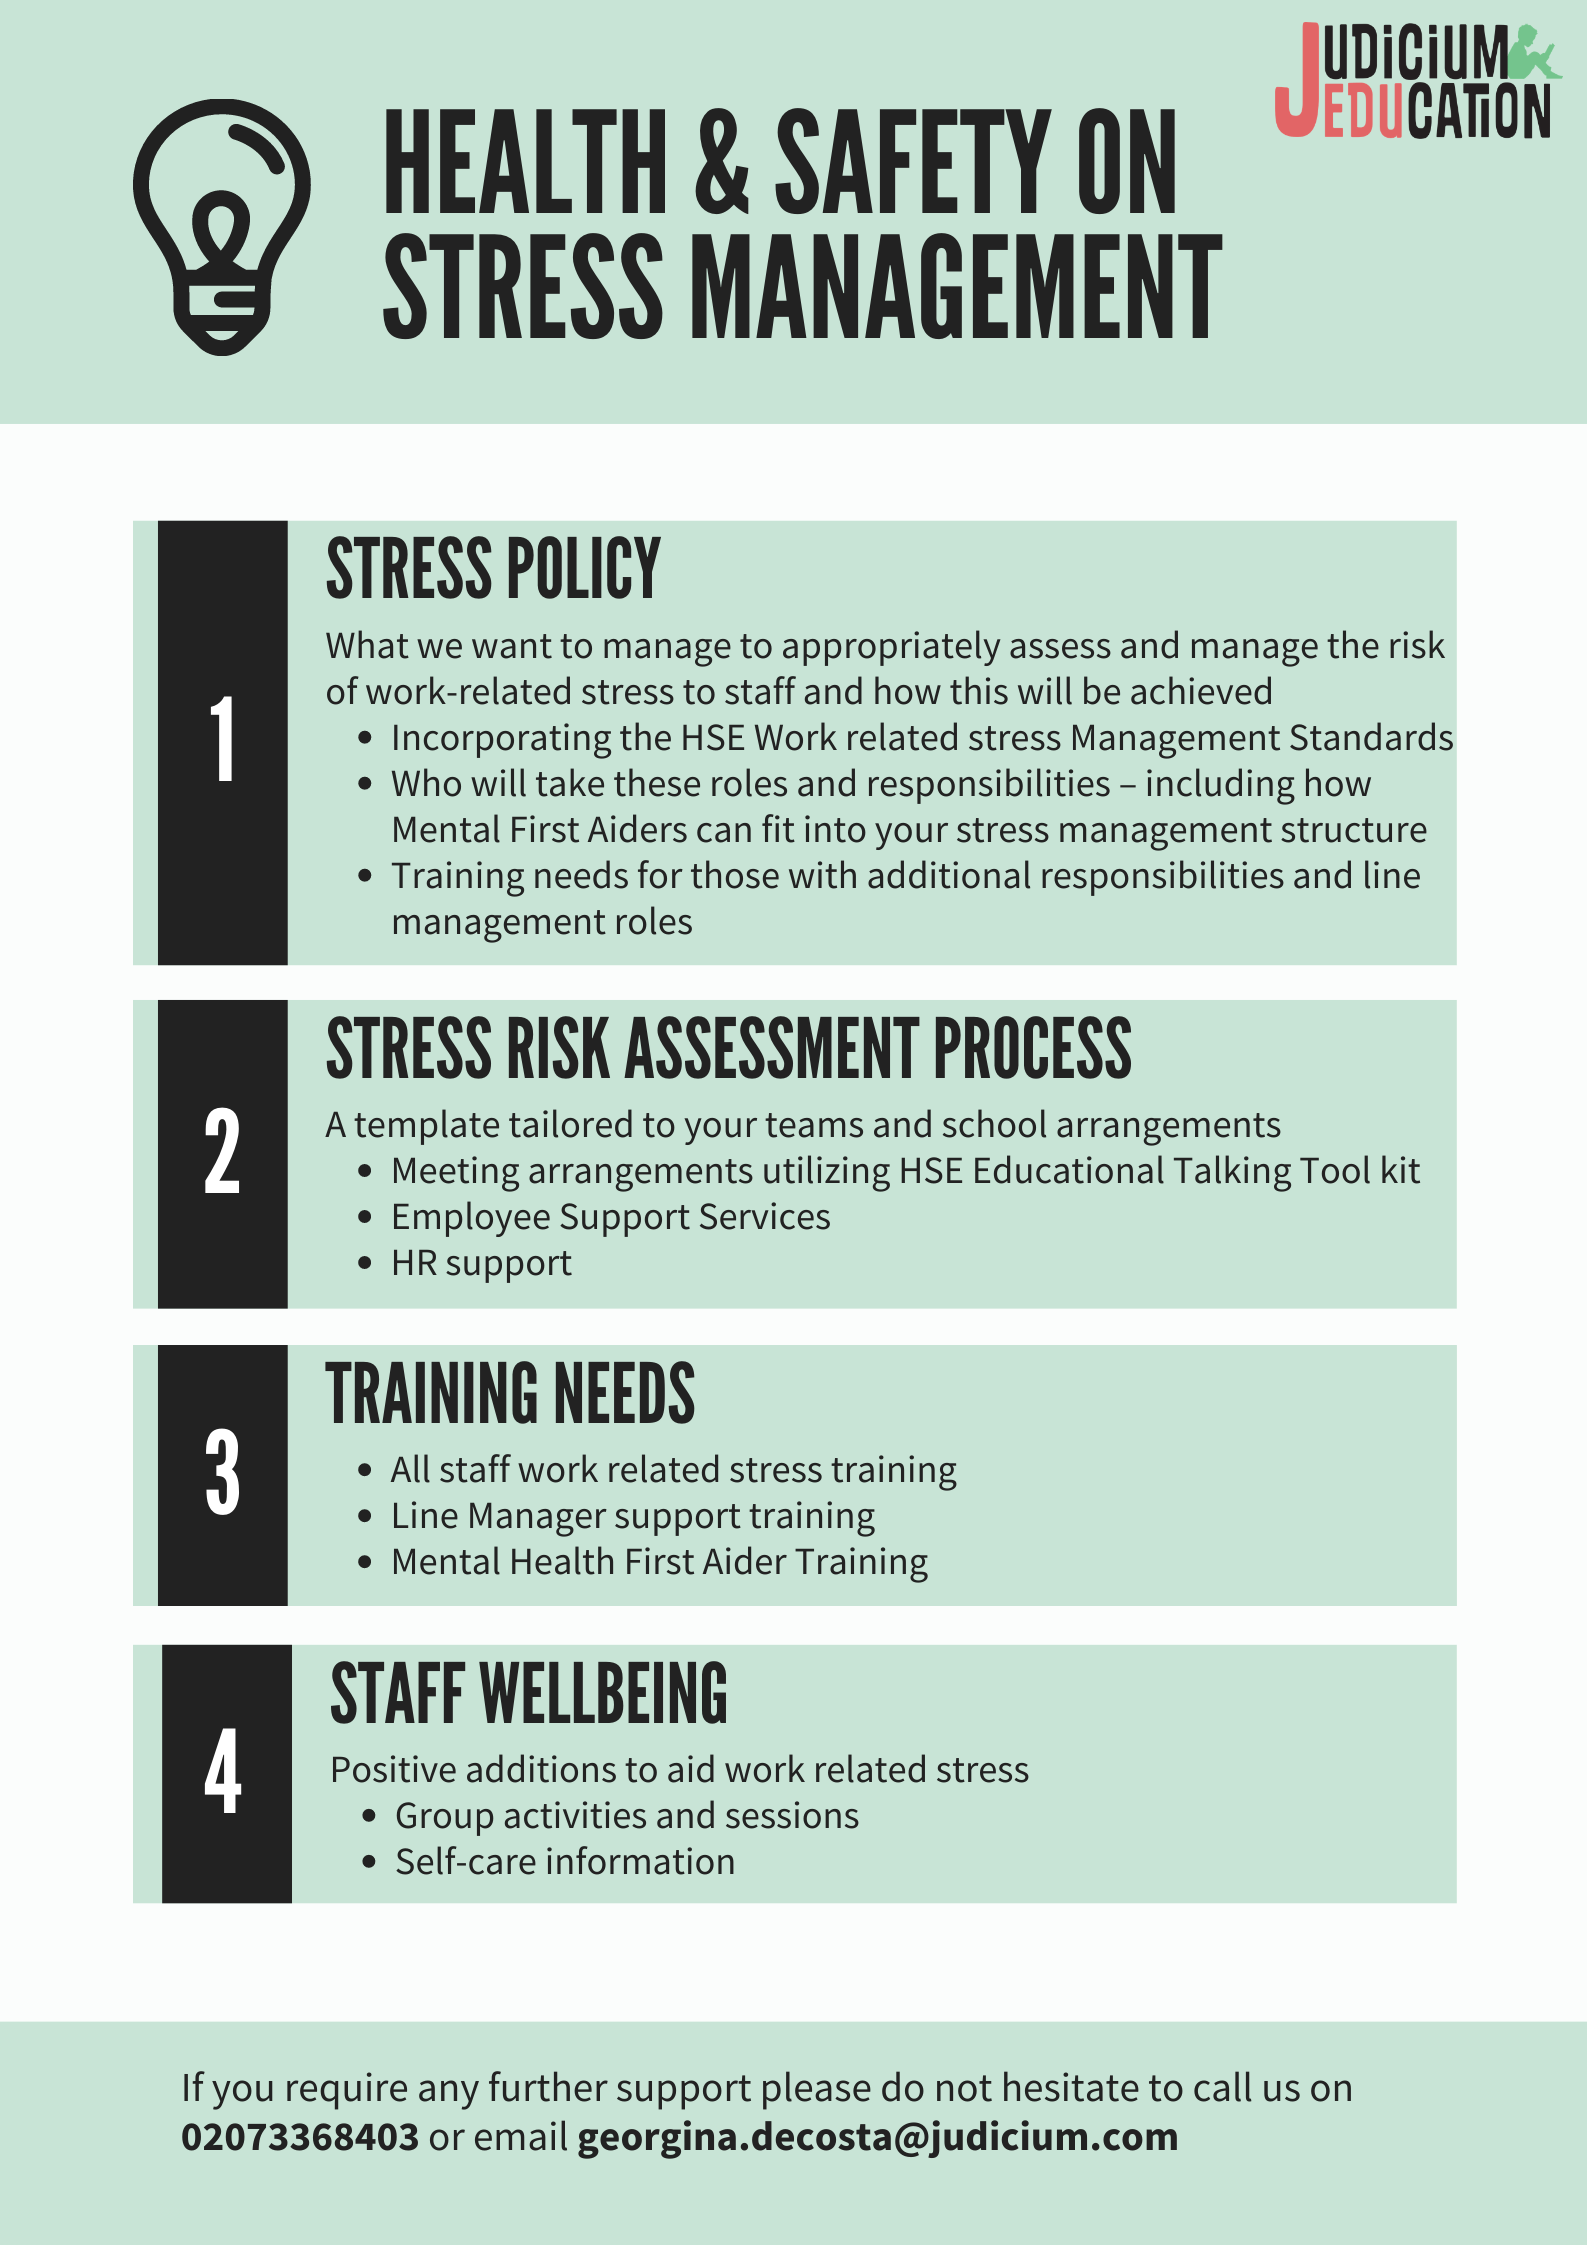 Health & Safety on Stress Management